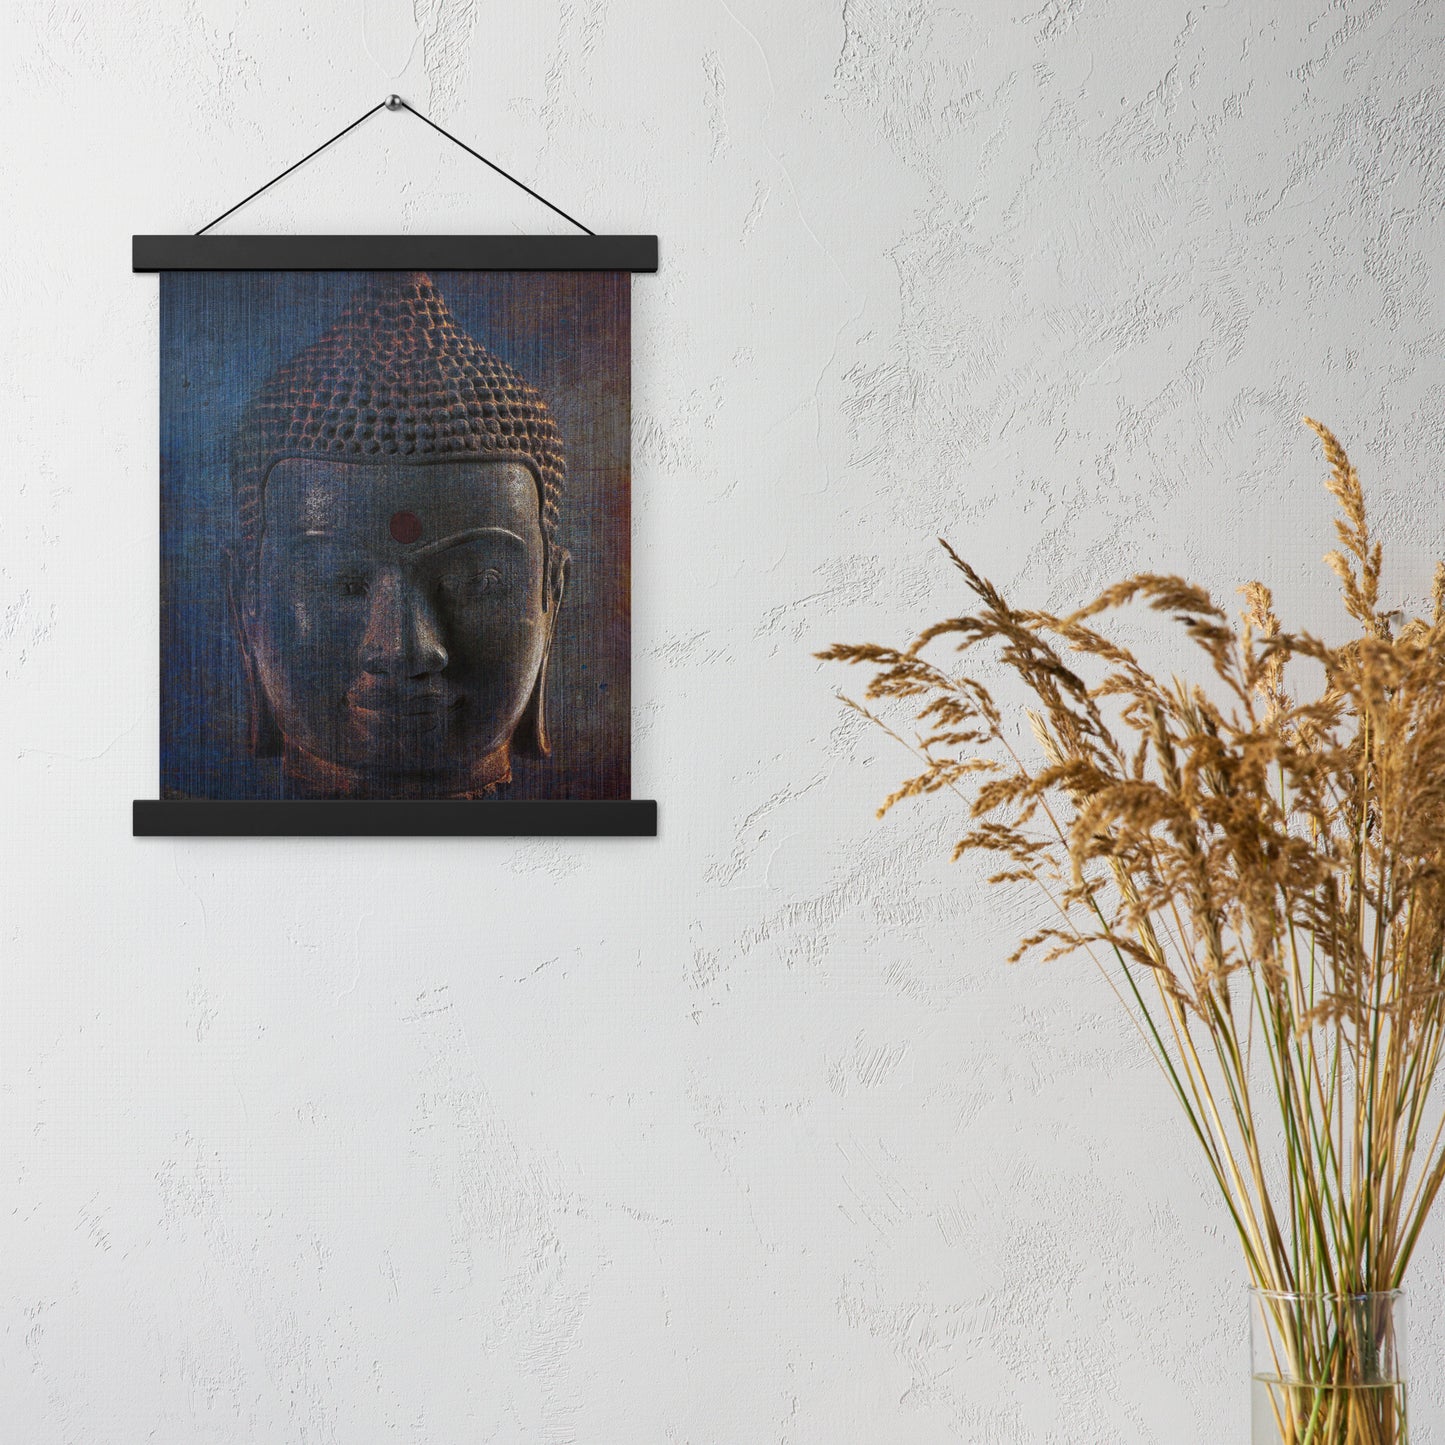 Spiritual and Meditation Wall Artwork Modern Art Blue Buddha Head Printed on Archival Paper with Magnetic Wood Hangers 11x14 hung